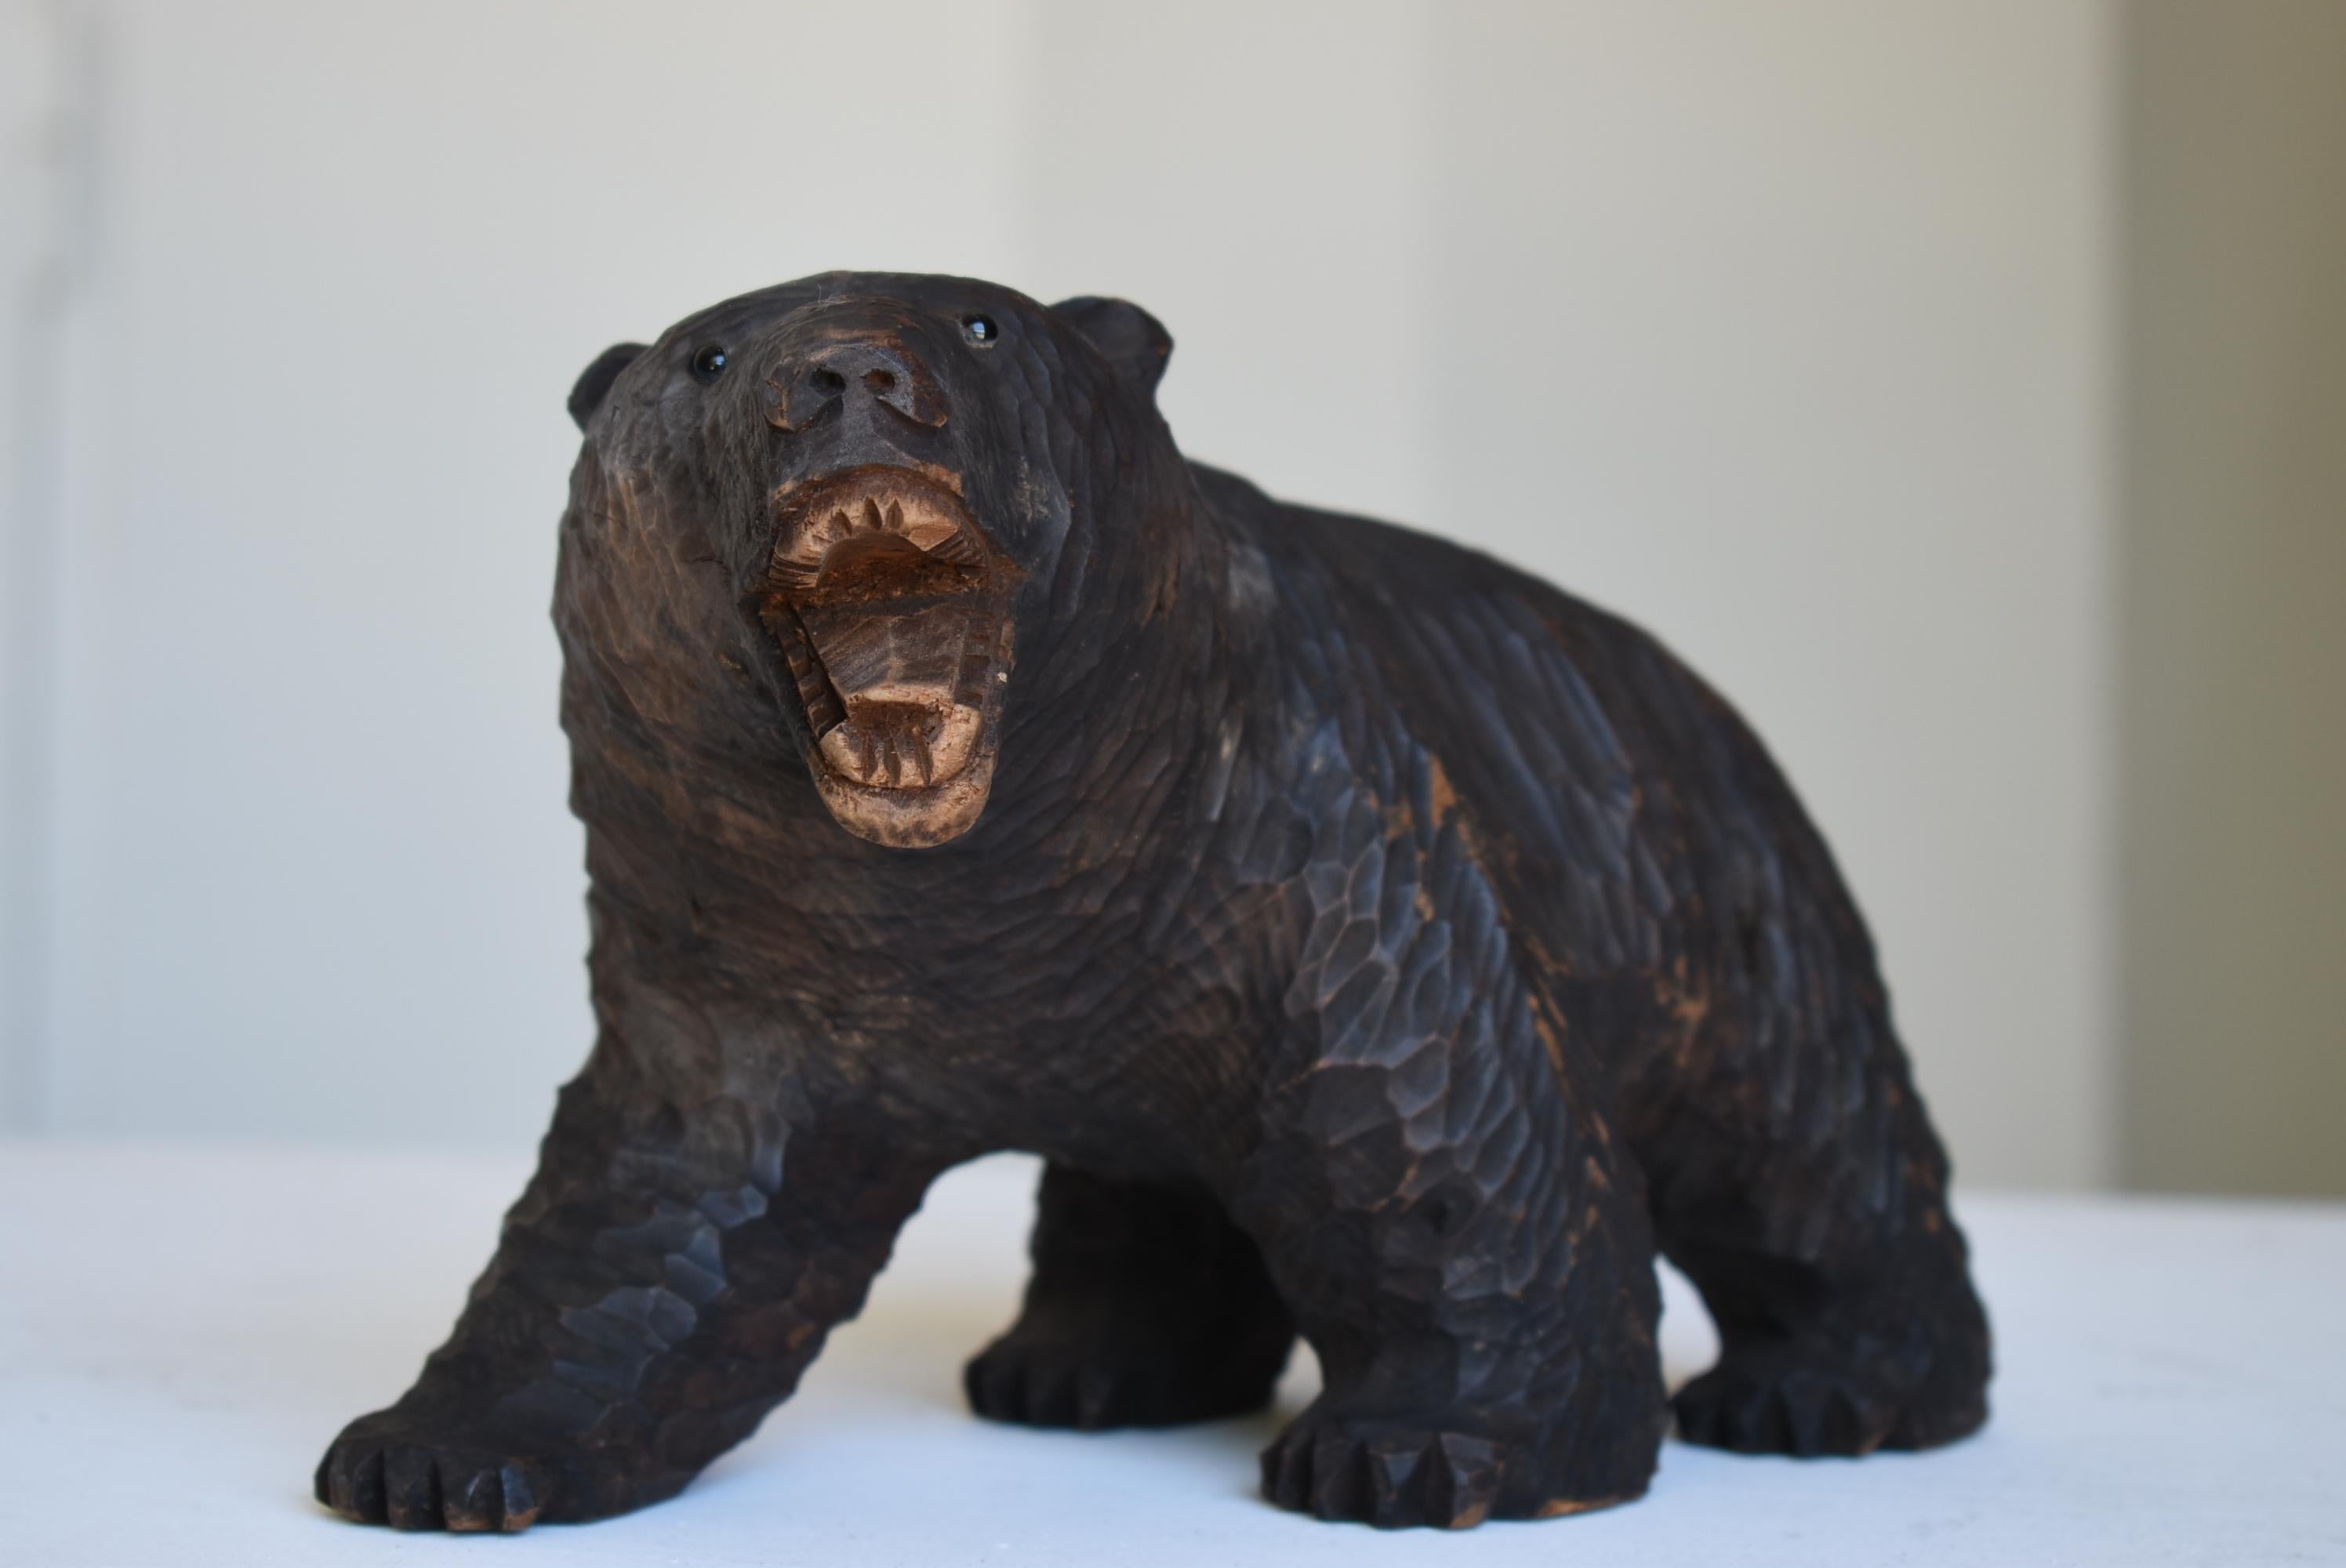 It is a wooden folk craft in the shape of a bear.
Mainly manufactured in Hokkaido.
It is a wood carving made from 1930 to 1950.

The eyes are made of glass.
This type is rare in Japan.

A dignified bear with a very cute expression.
The taste is also